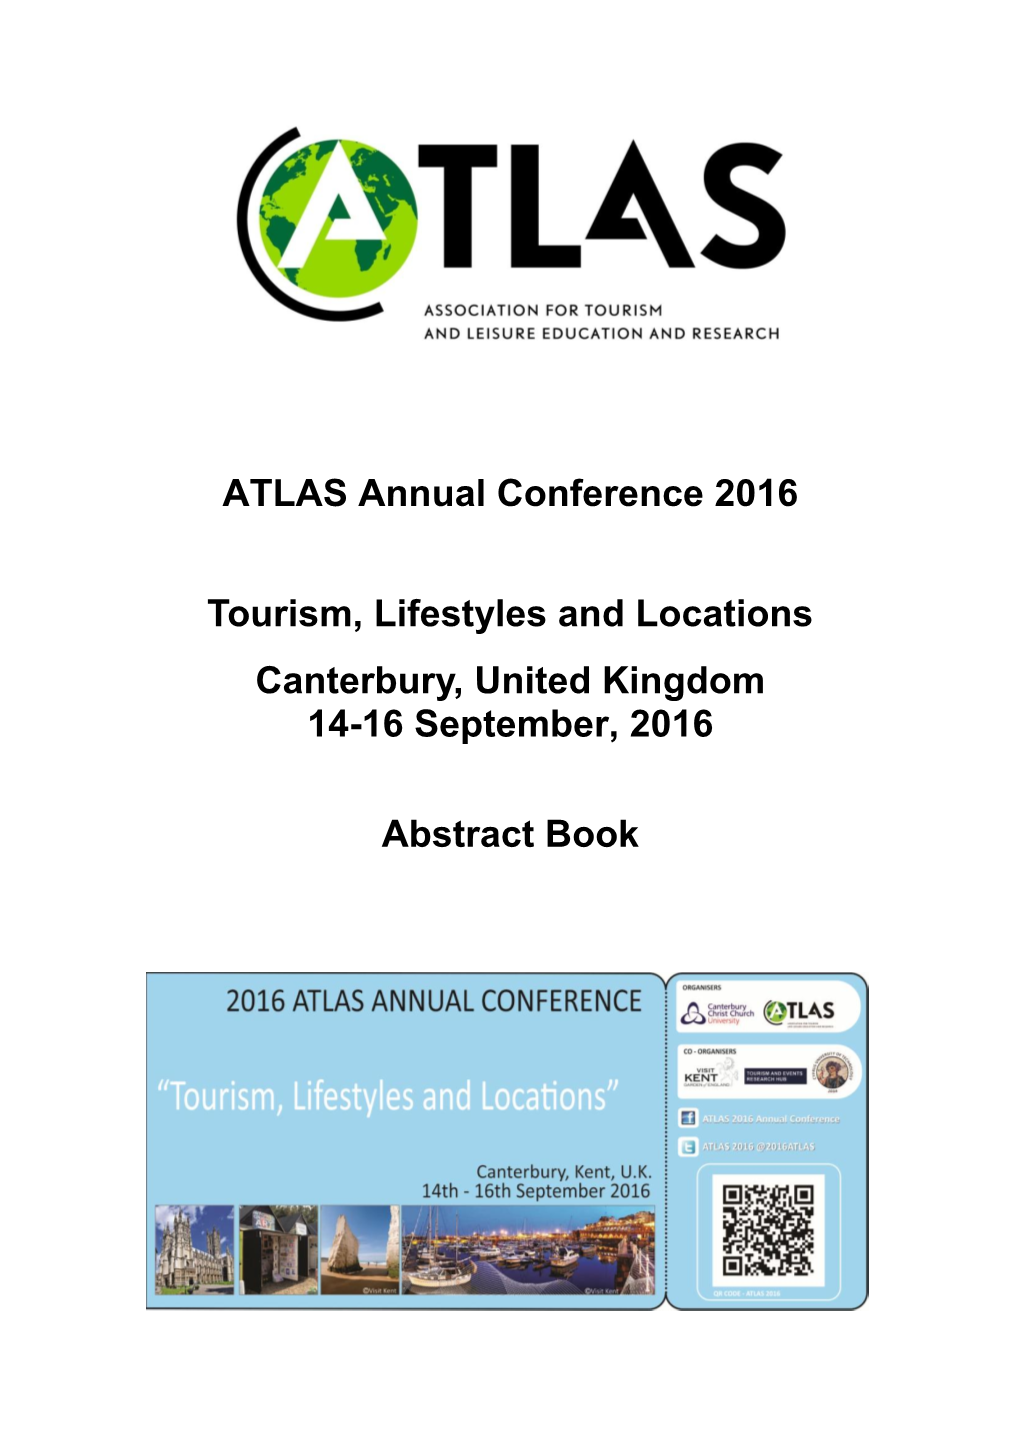 ATLAS Annual Conference 2016 Tourism, Lifestyles and Locations Canterbury, United Kingdom 14-16 September, 2016